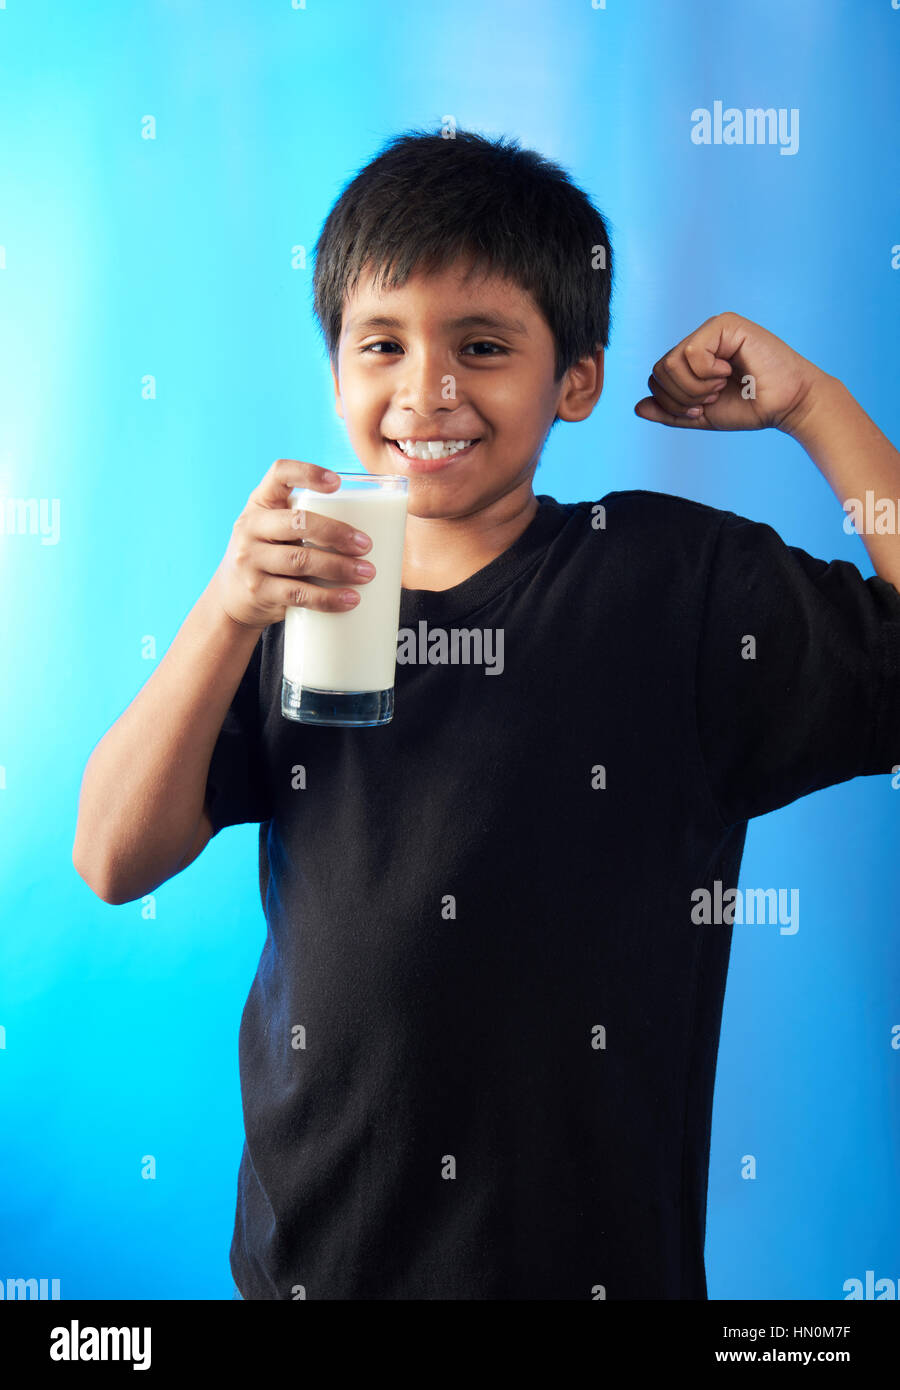 boy showing muscle holding milk isolated on blue background Stock Photo